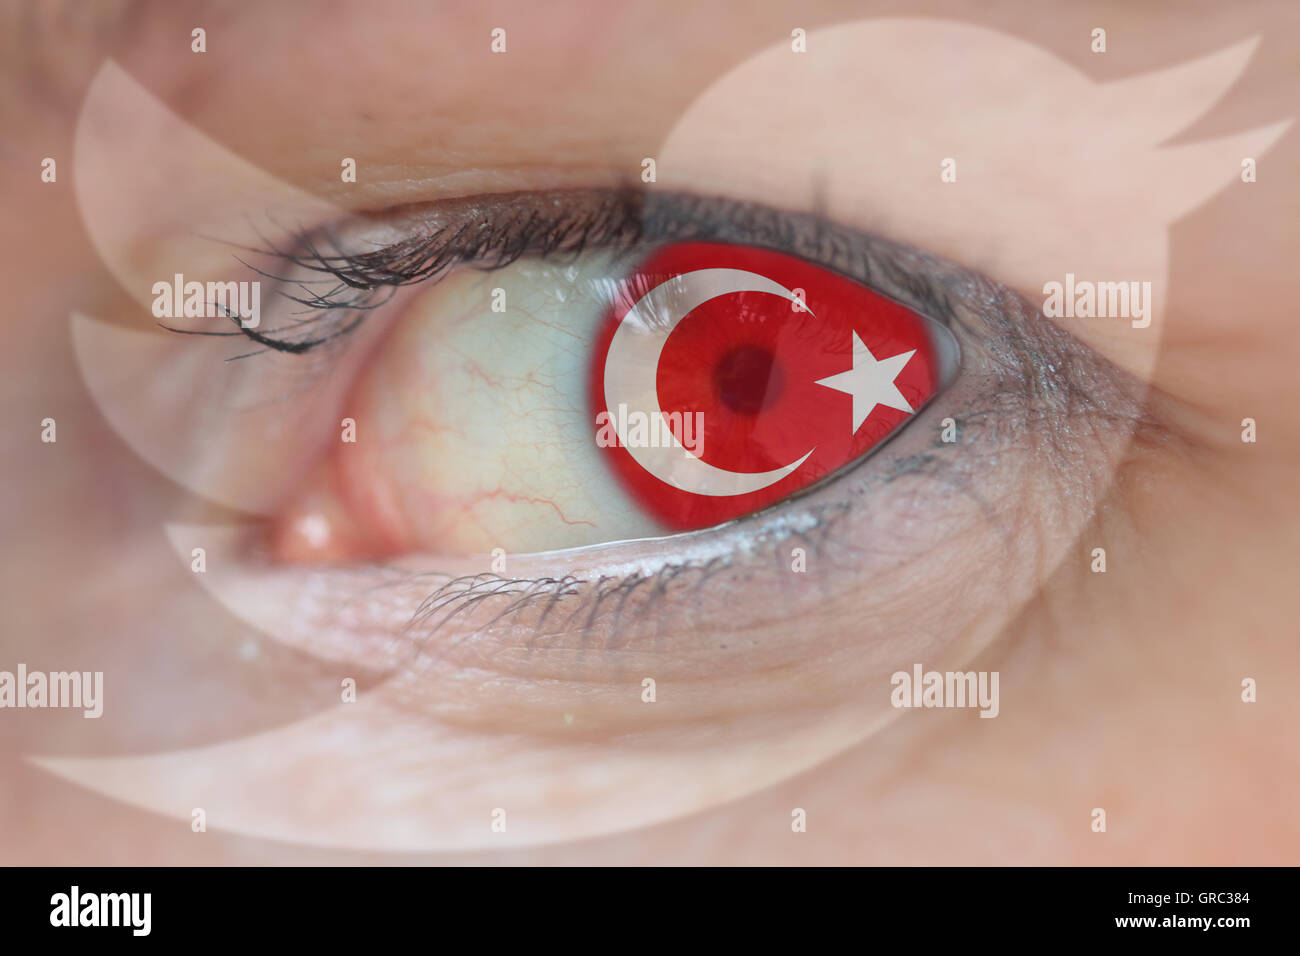 Turkish Flag And Twitter Logo In A Woman S Eye Stock Photo